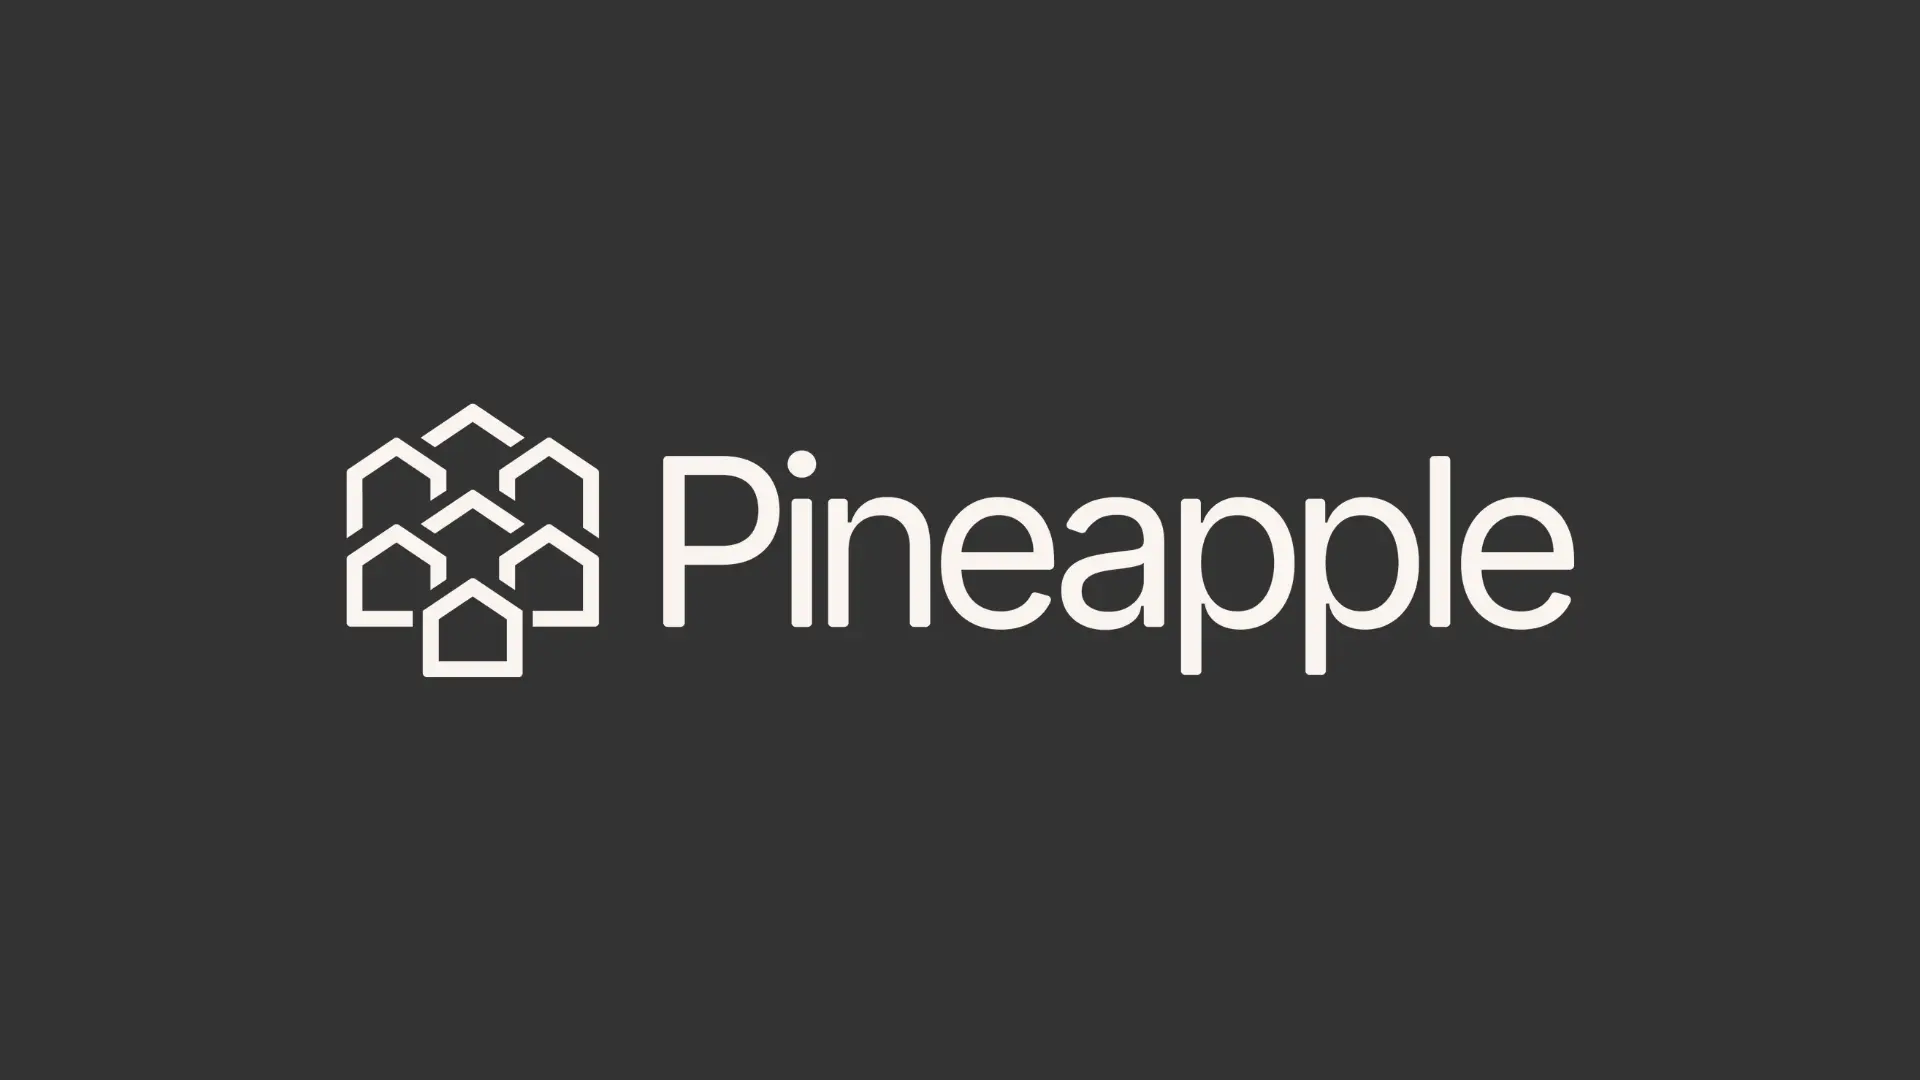 Pineapple Financial Inc. Announces Participation in the EF Hutton Annual Global Conference